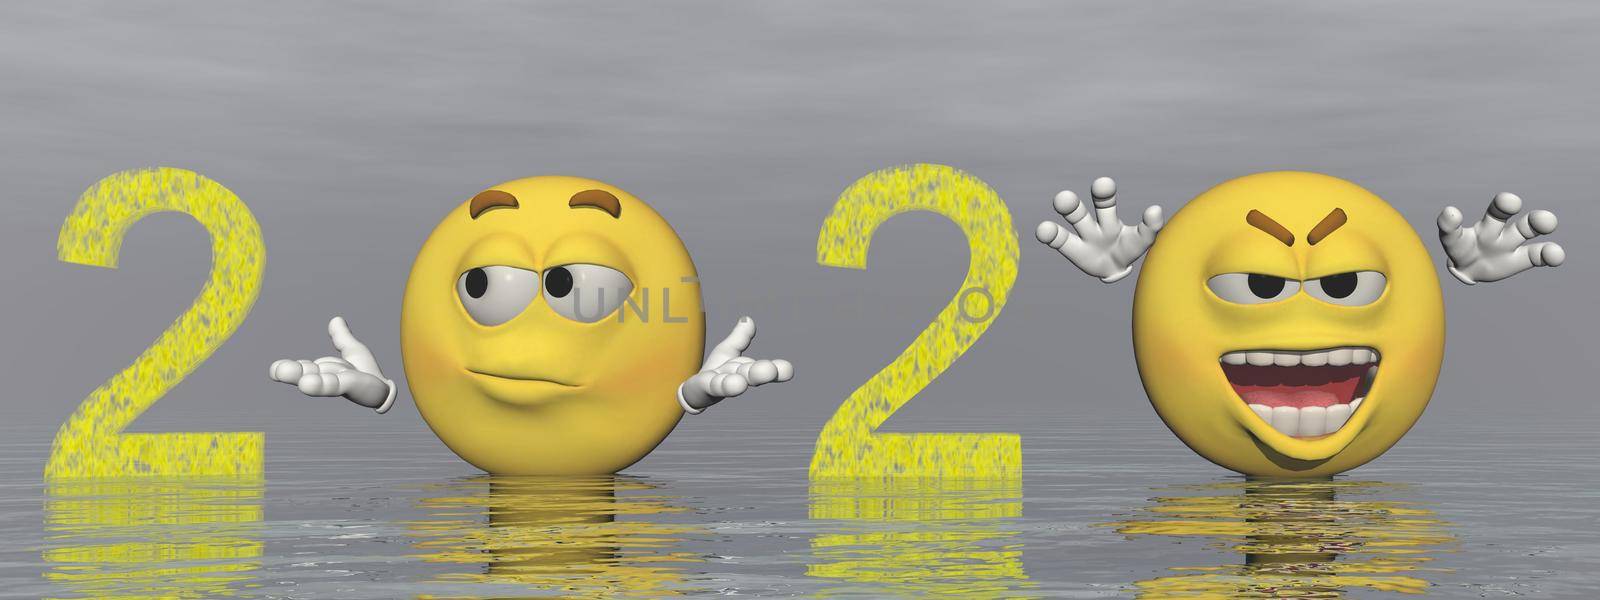 happy new year 2020 with yellow smileys - 3d rendering